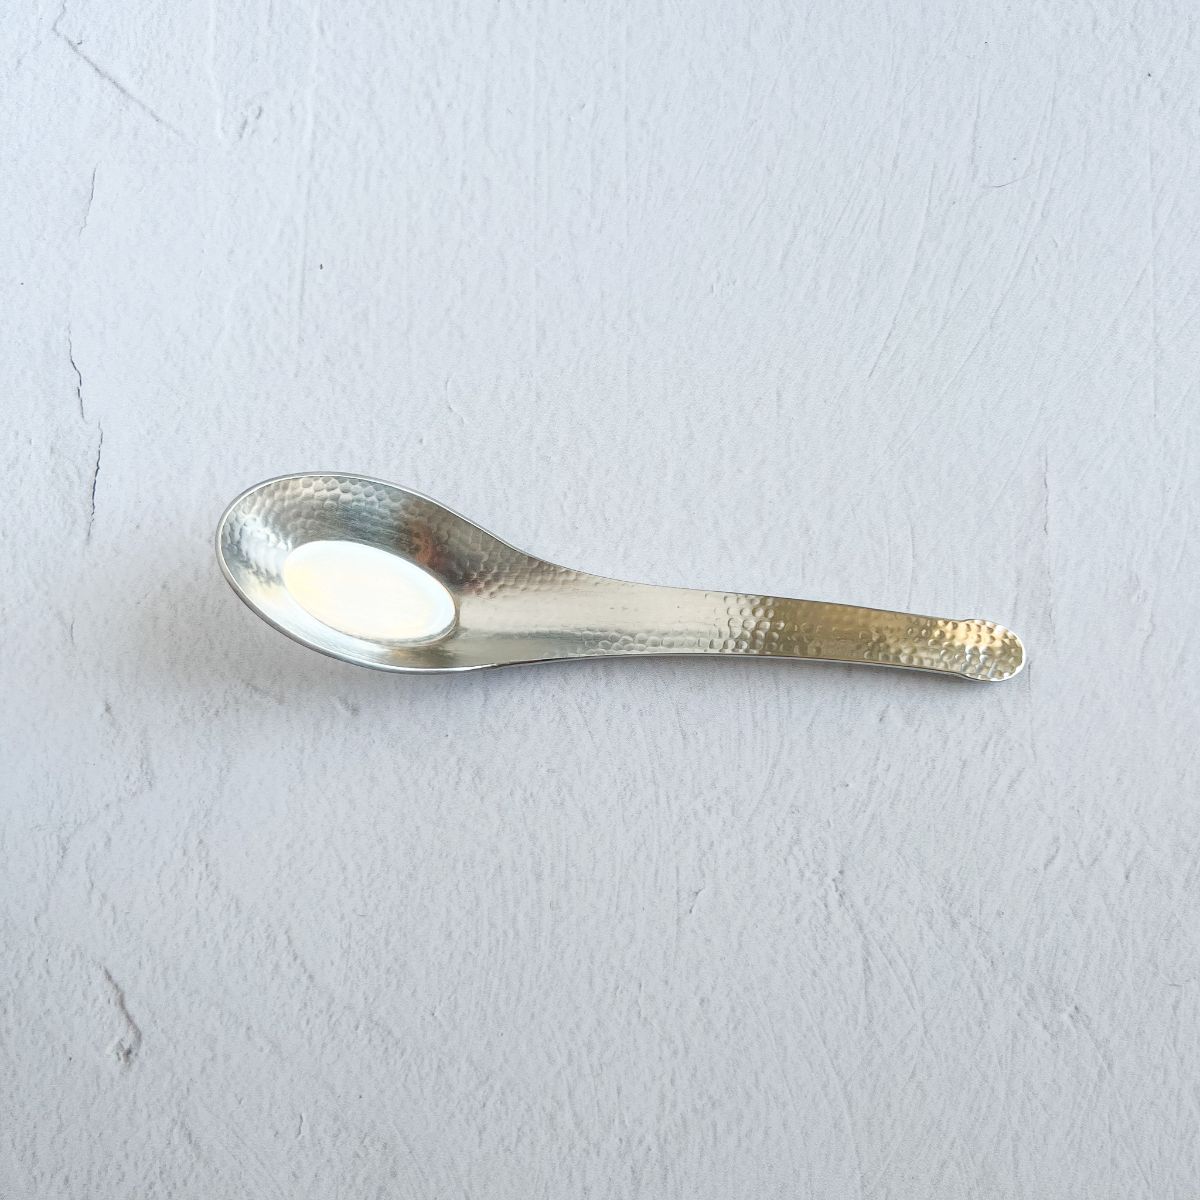 Stainless Steel Soup Spoon made in TubameNagamochi Shop